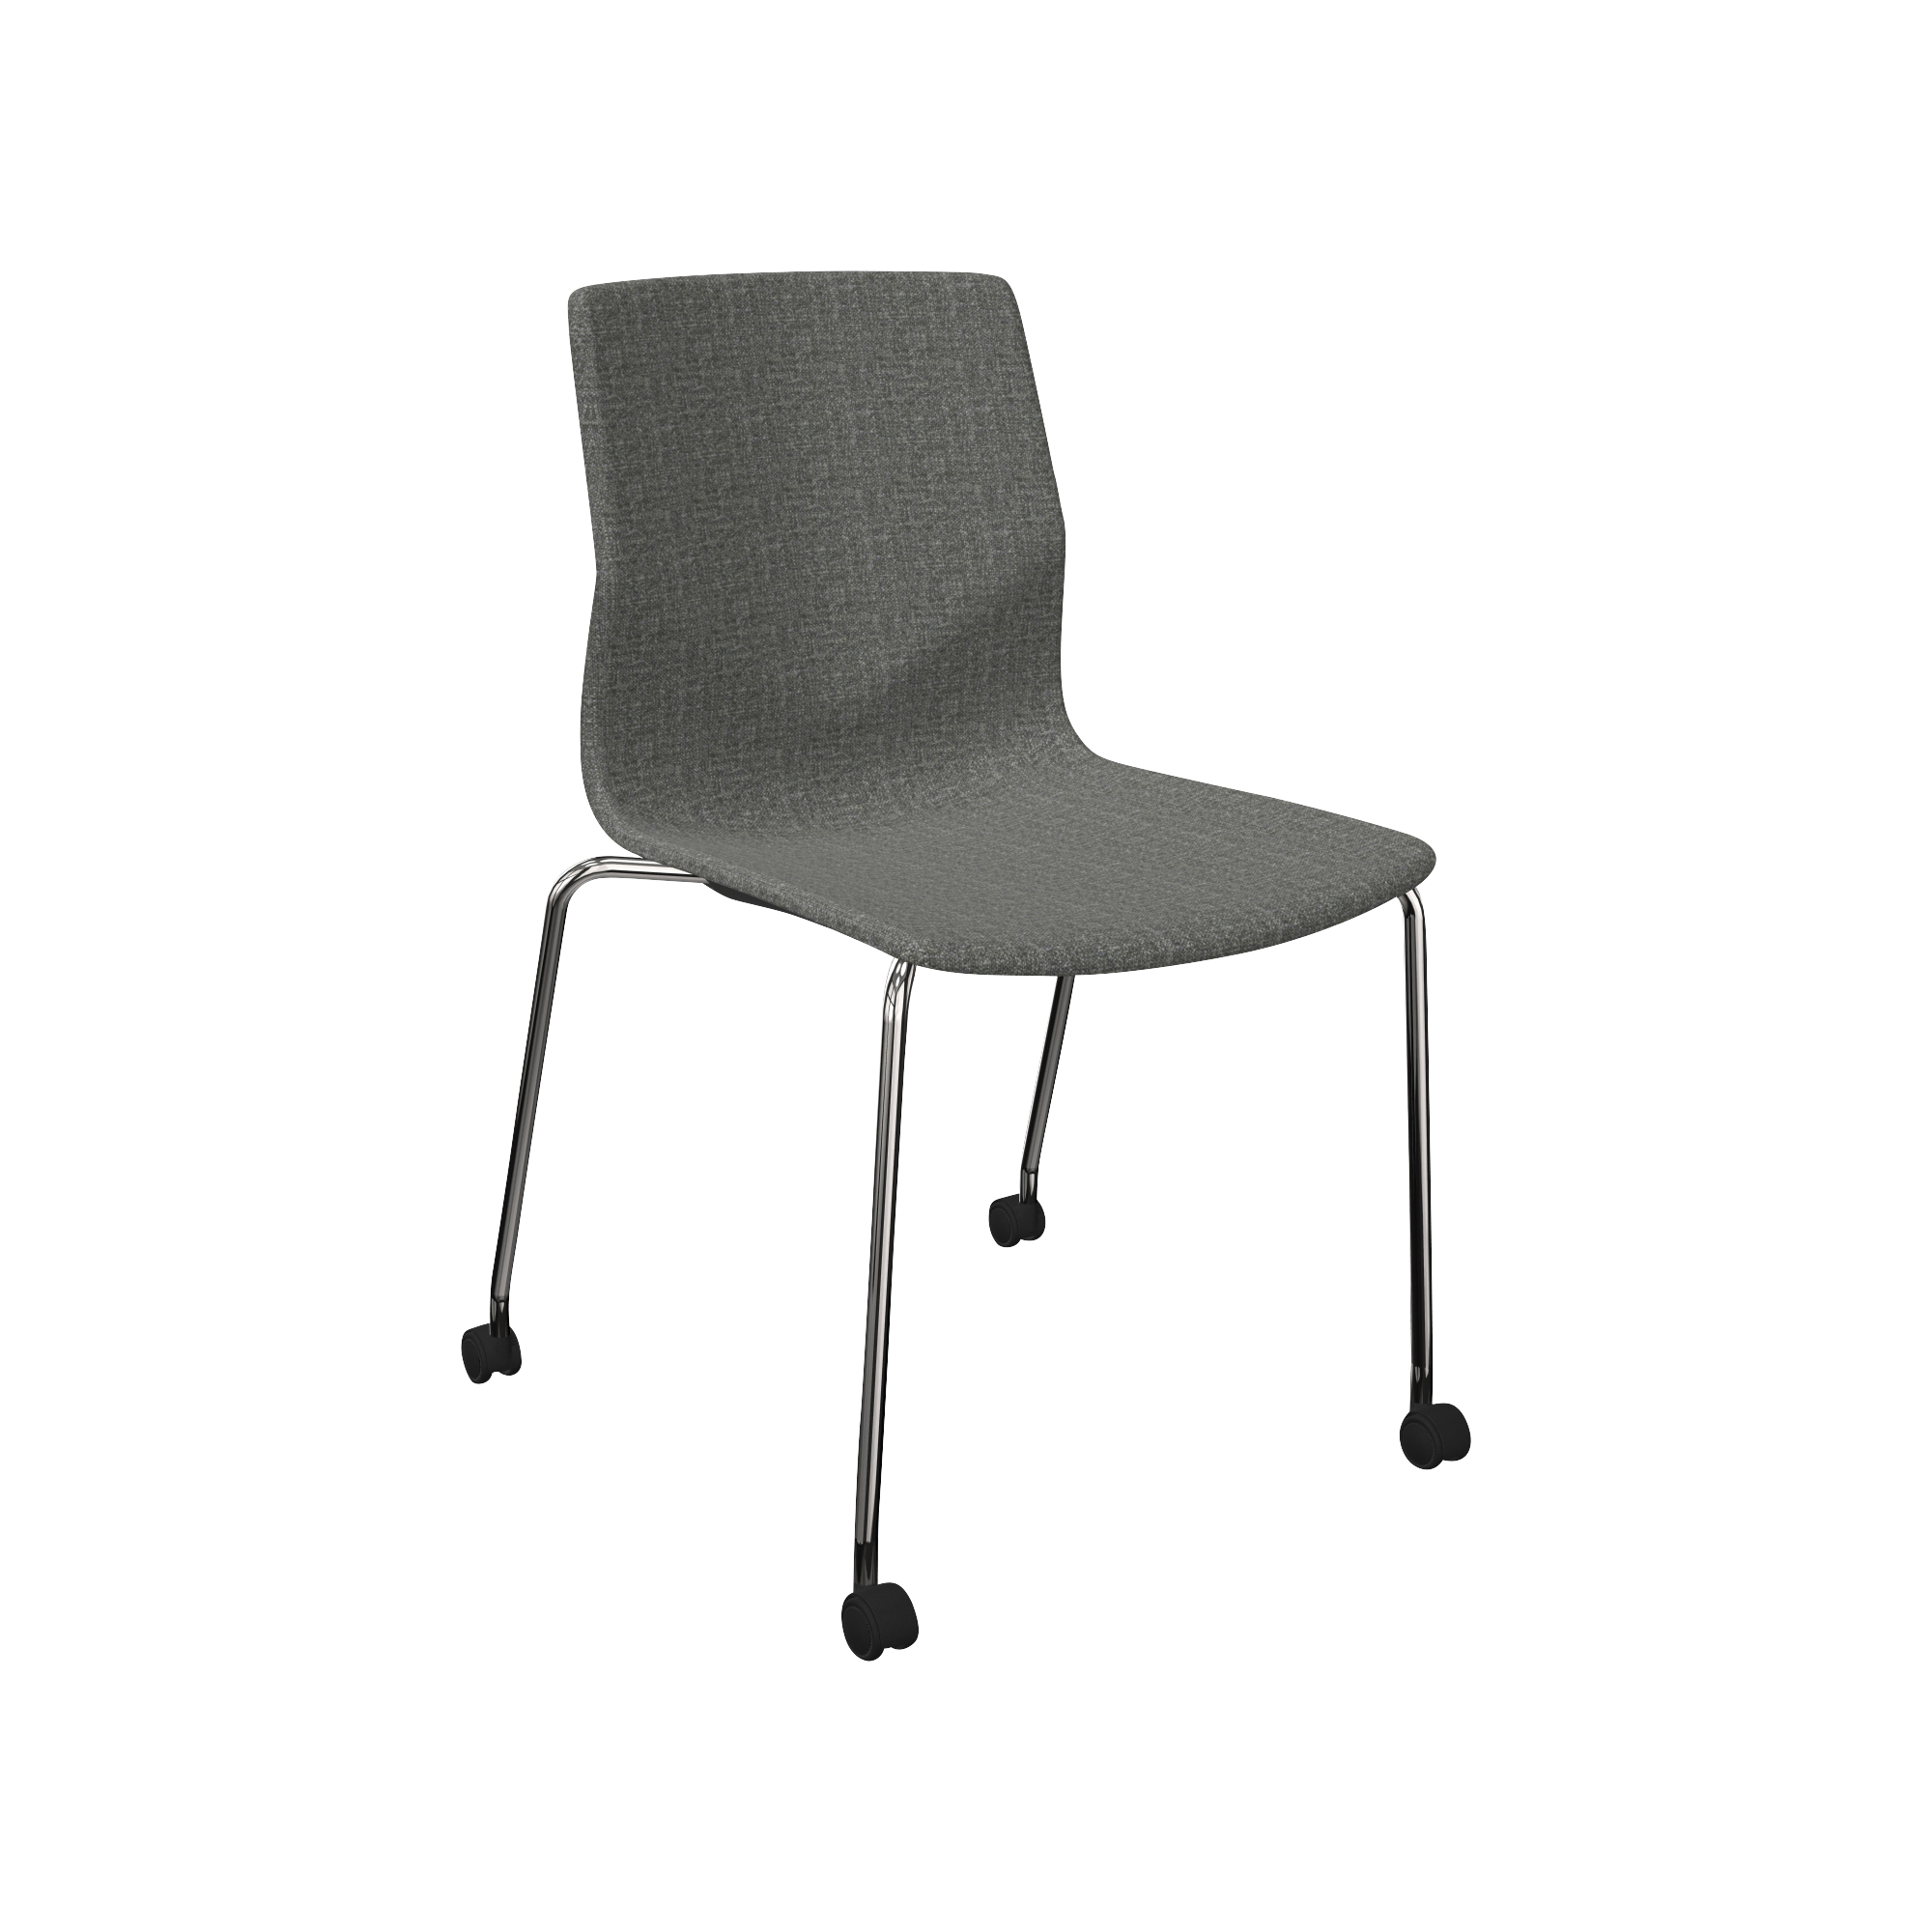 designer office chair with metal legs